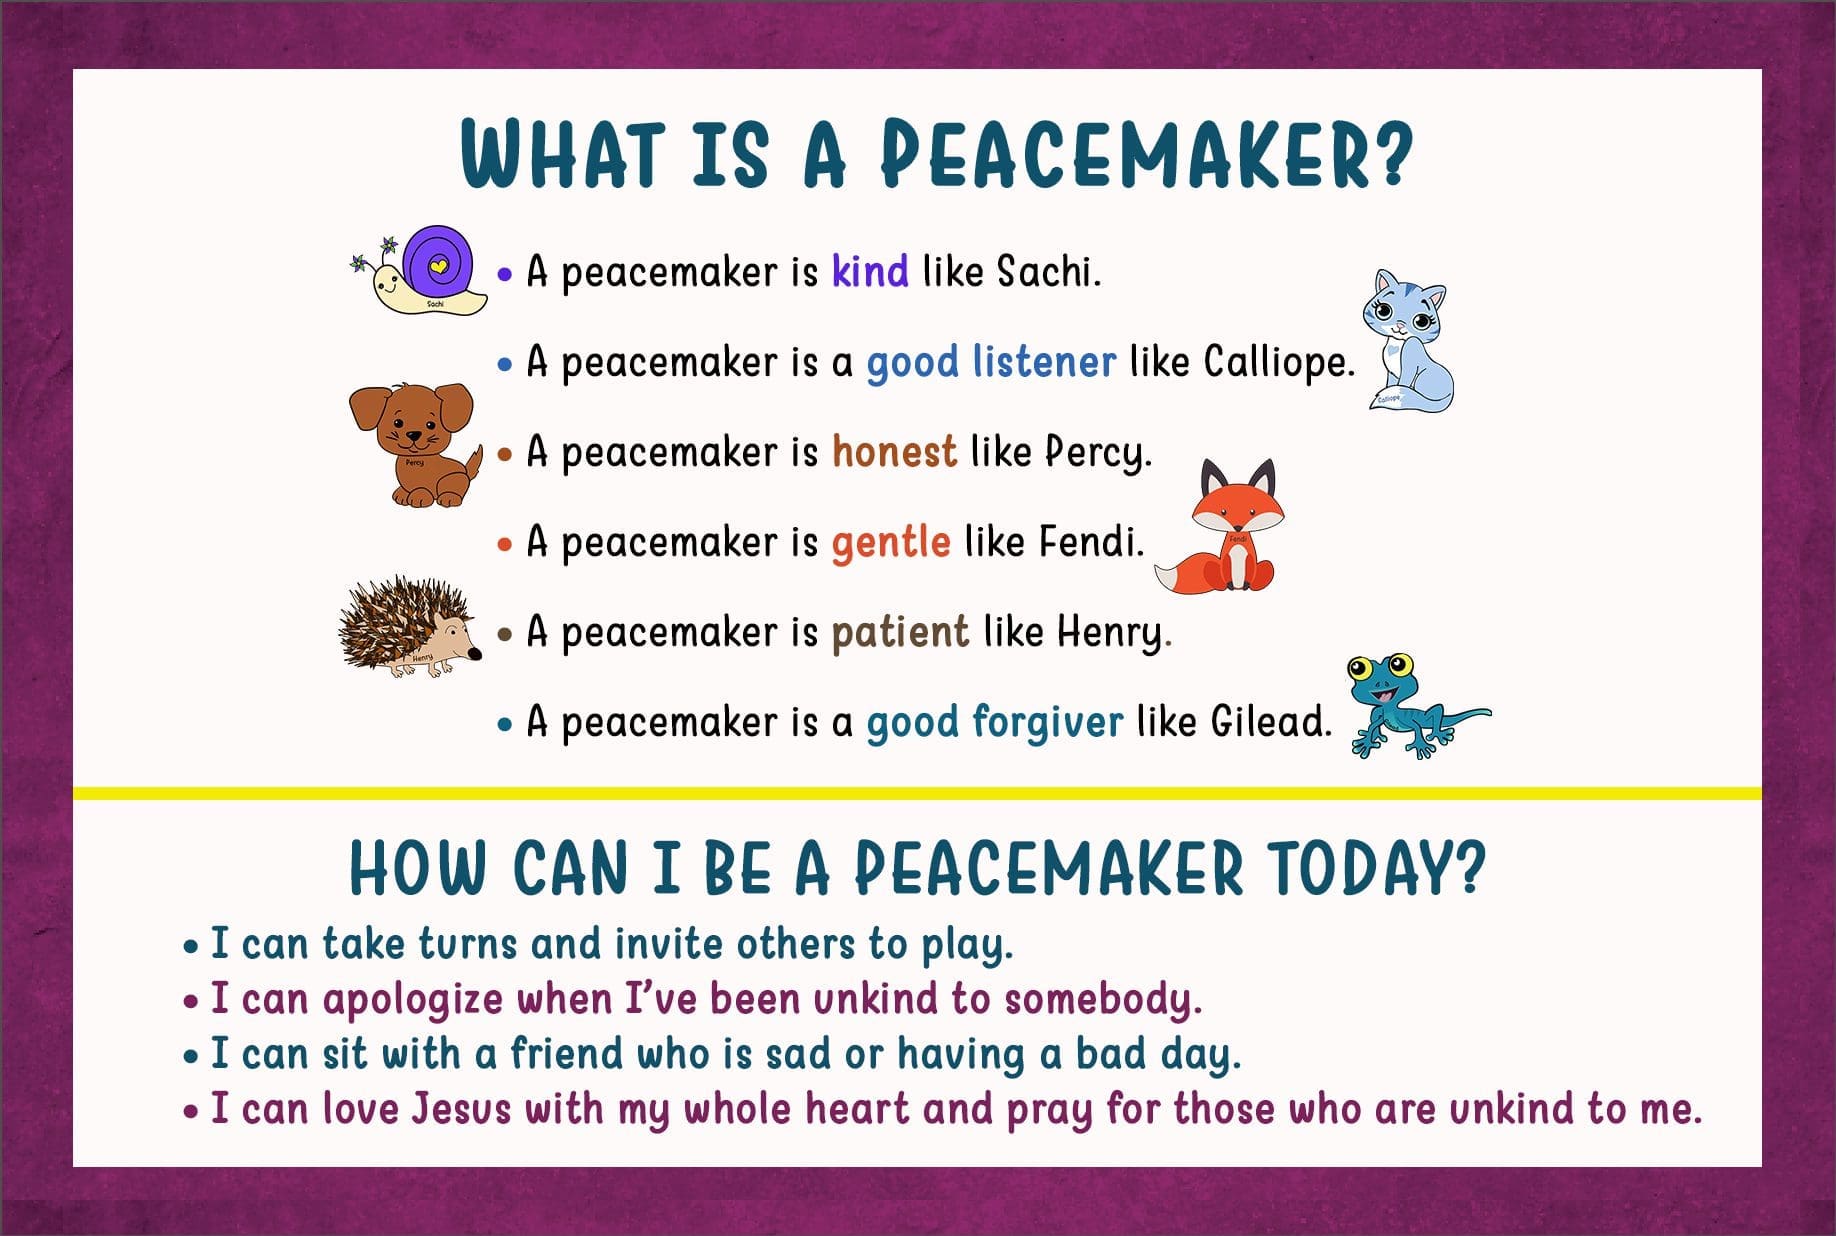 What is a Peacemaker?